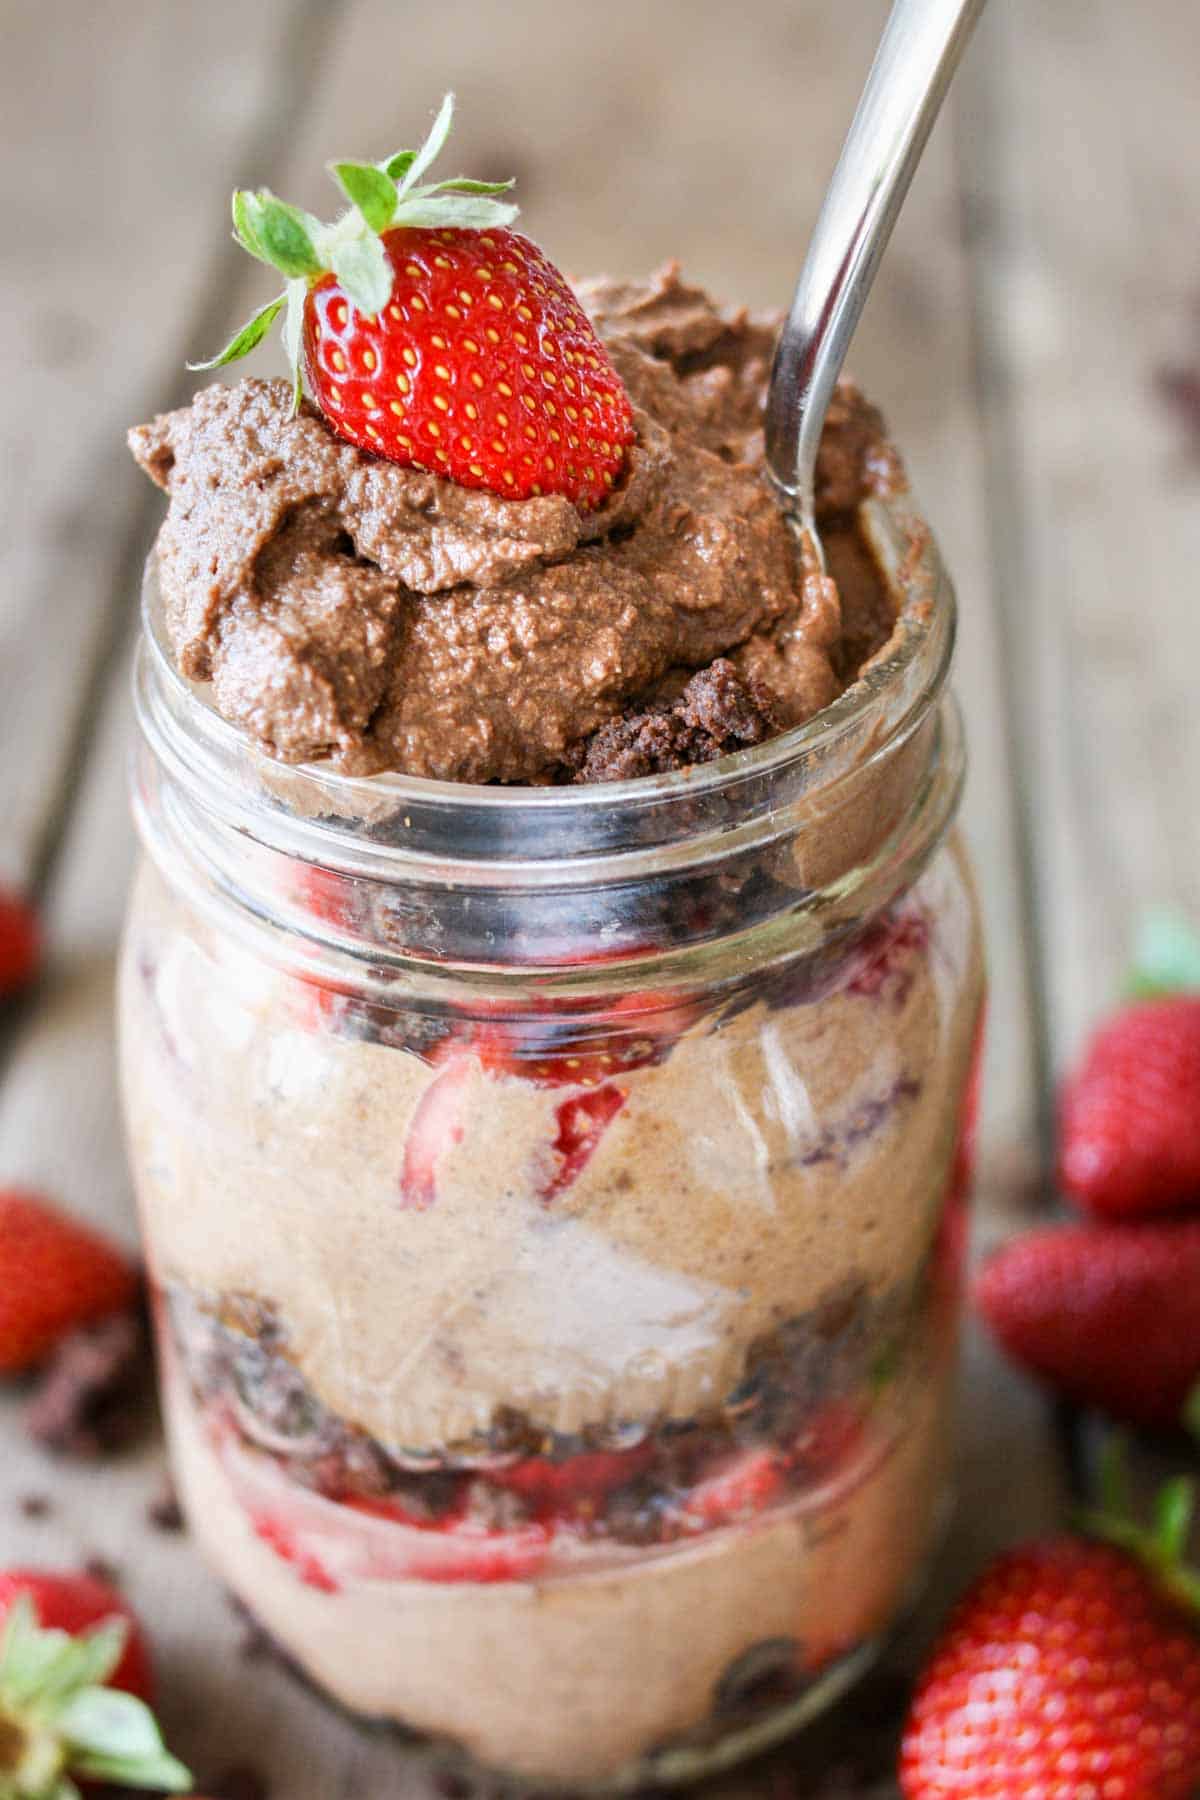 A close up of a spoon in a jar filled with Strawberry Chocolate Mousse Dessert